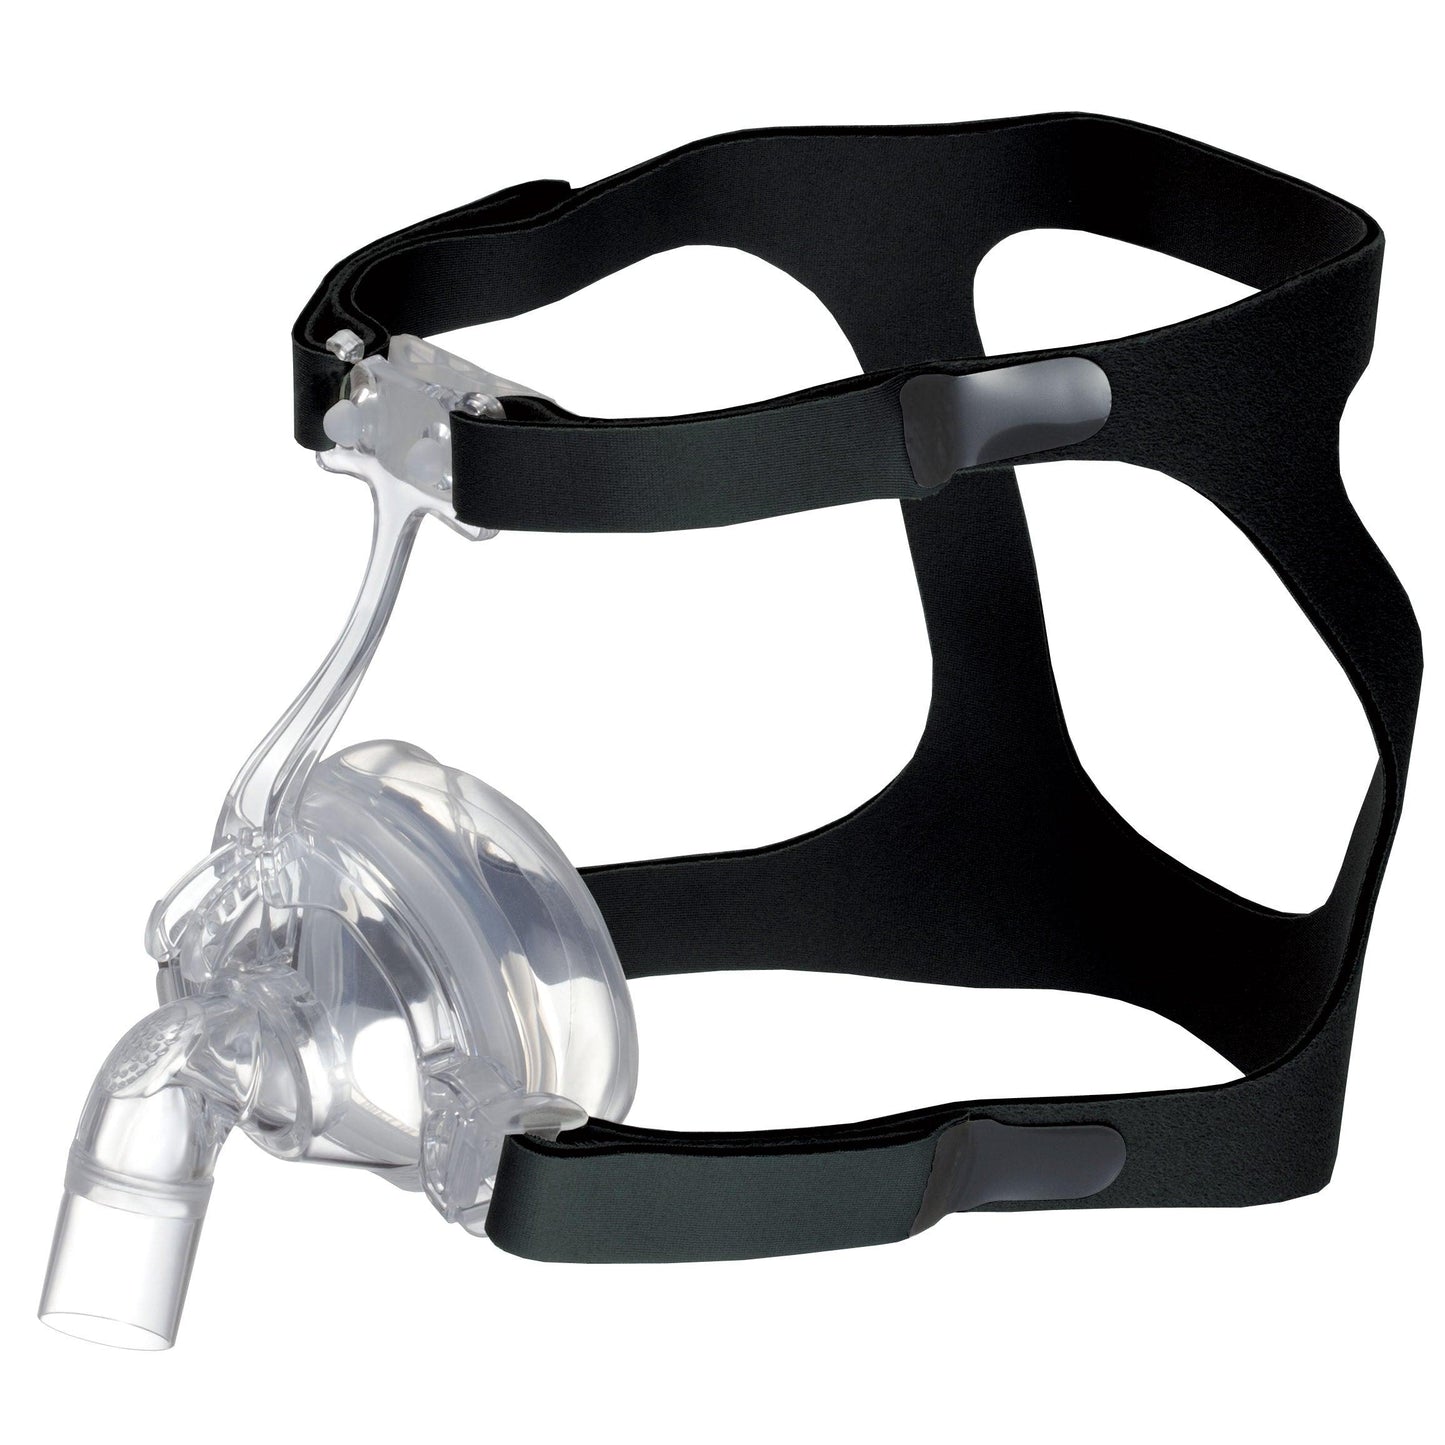 NEW Adjustable Deluxe Nasal CPAP Mask with Headgear CM106 - MBR Medicals